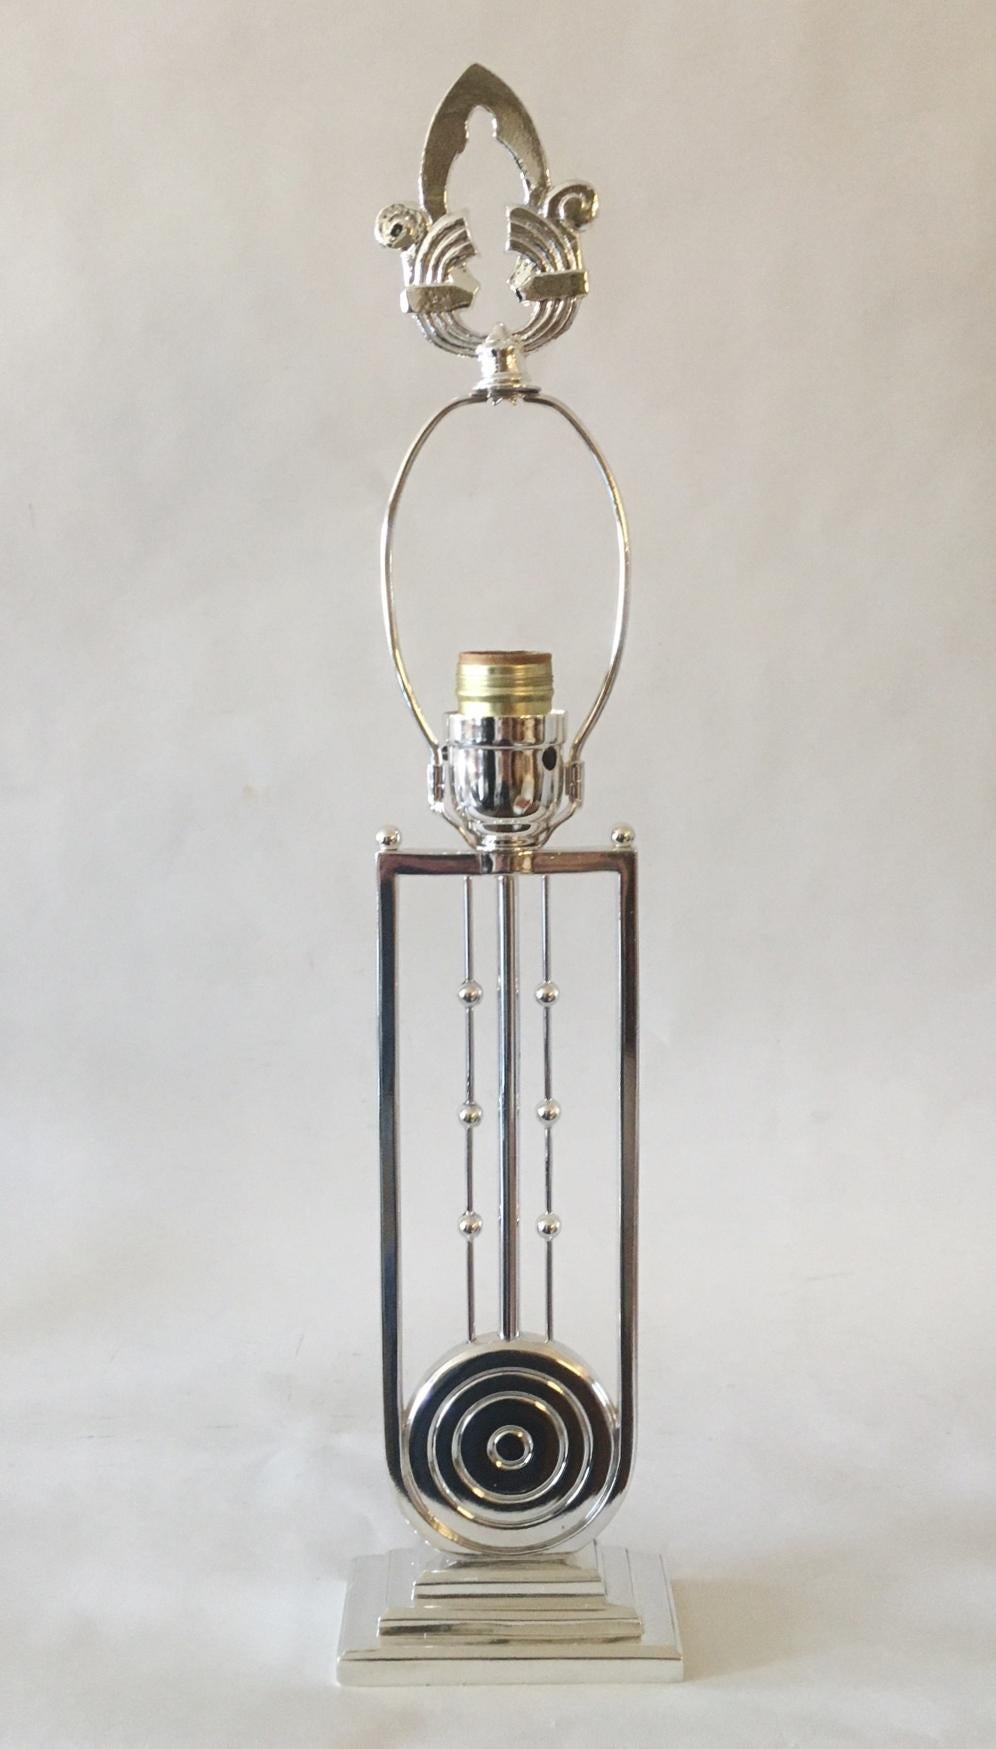 This is a very pretty American Art Deco table lamp. Rising up from the stepped oblong base is the 